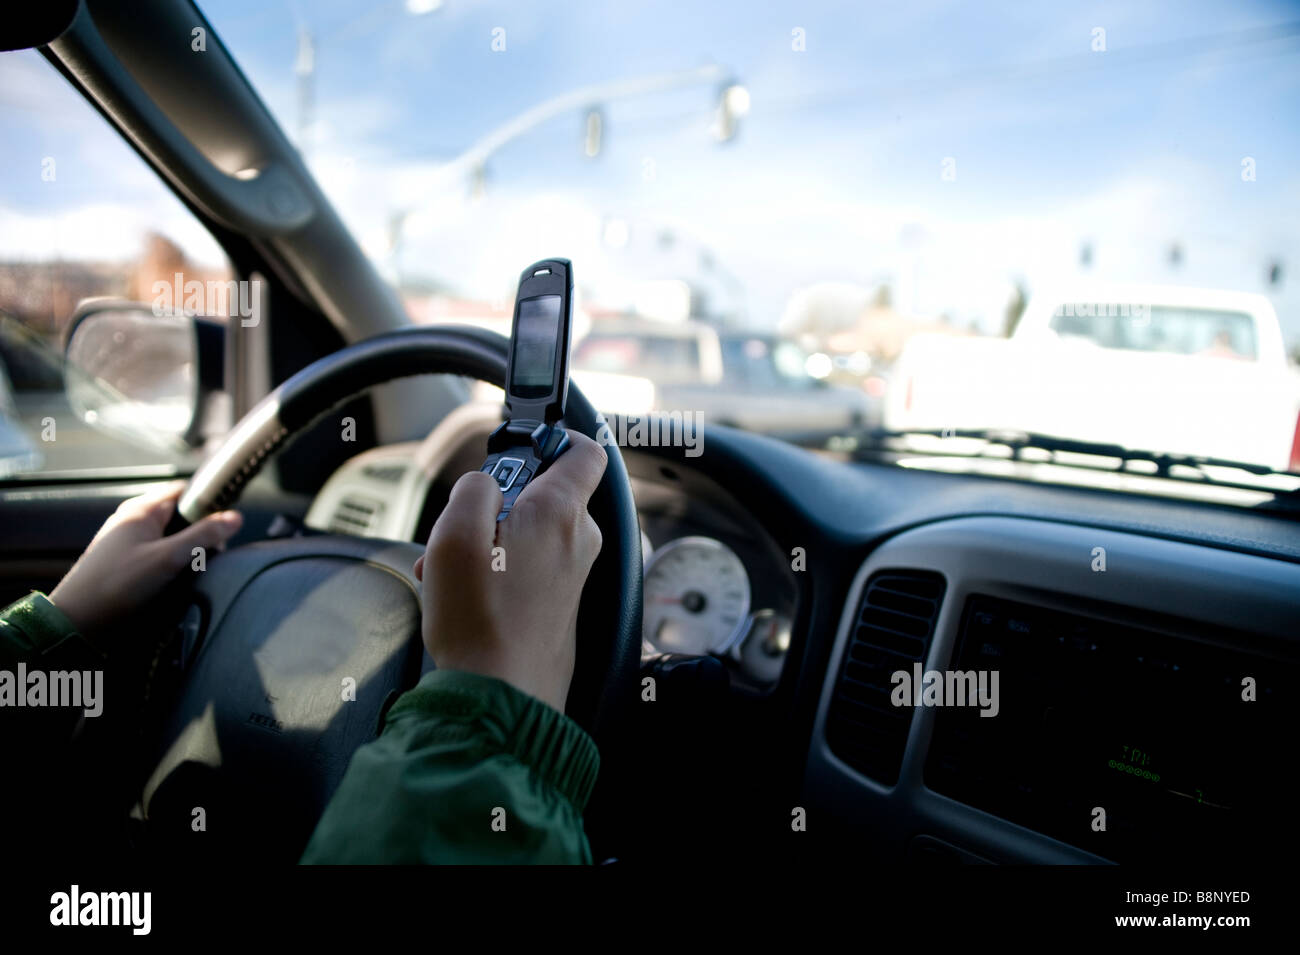 Person texting on a cell phone while driving a car Stock Photo